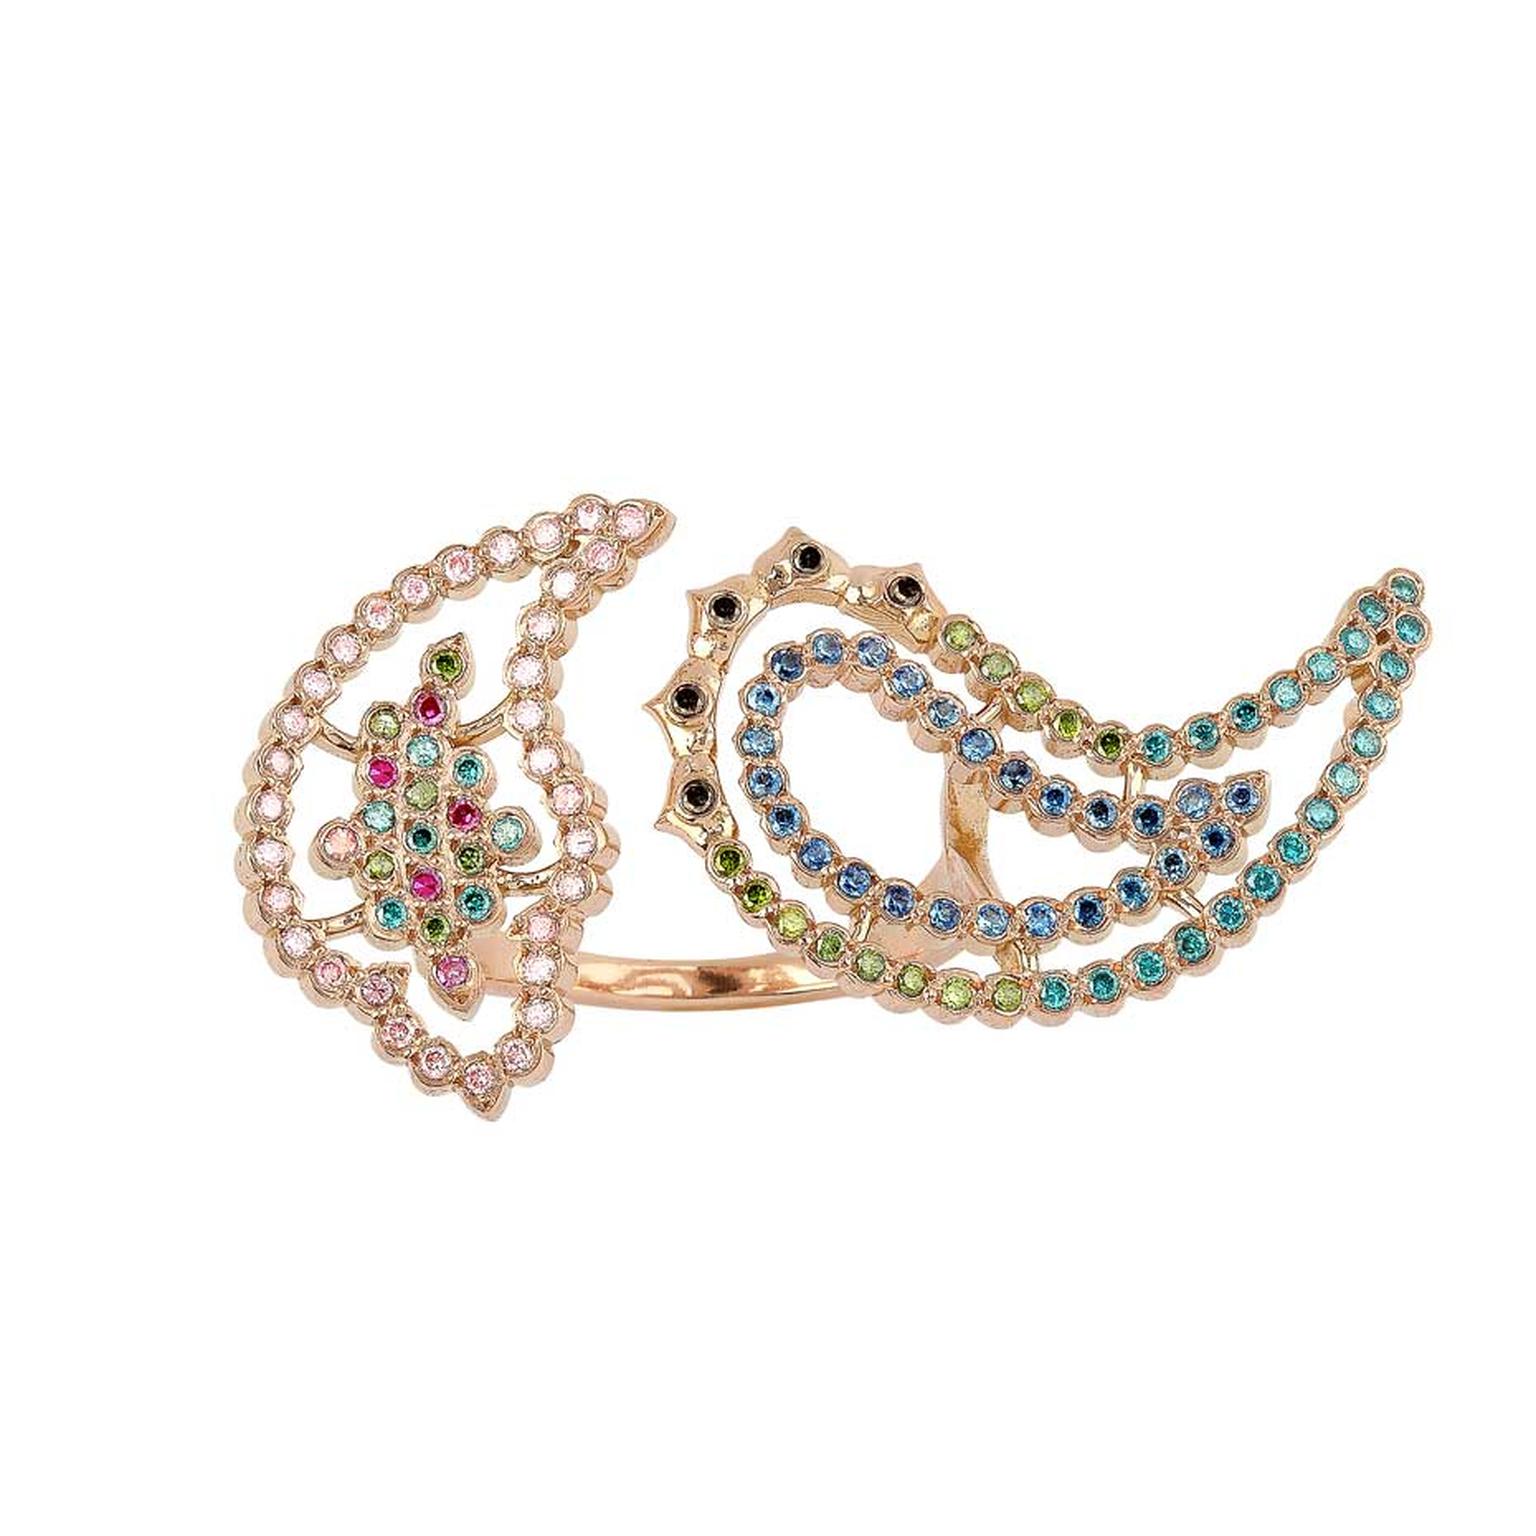 Lito Hedy Lamarr ring in pink gold with coloured diamonds and blue sapphires from the Wonderland collection.